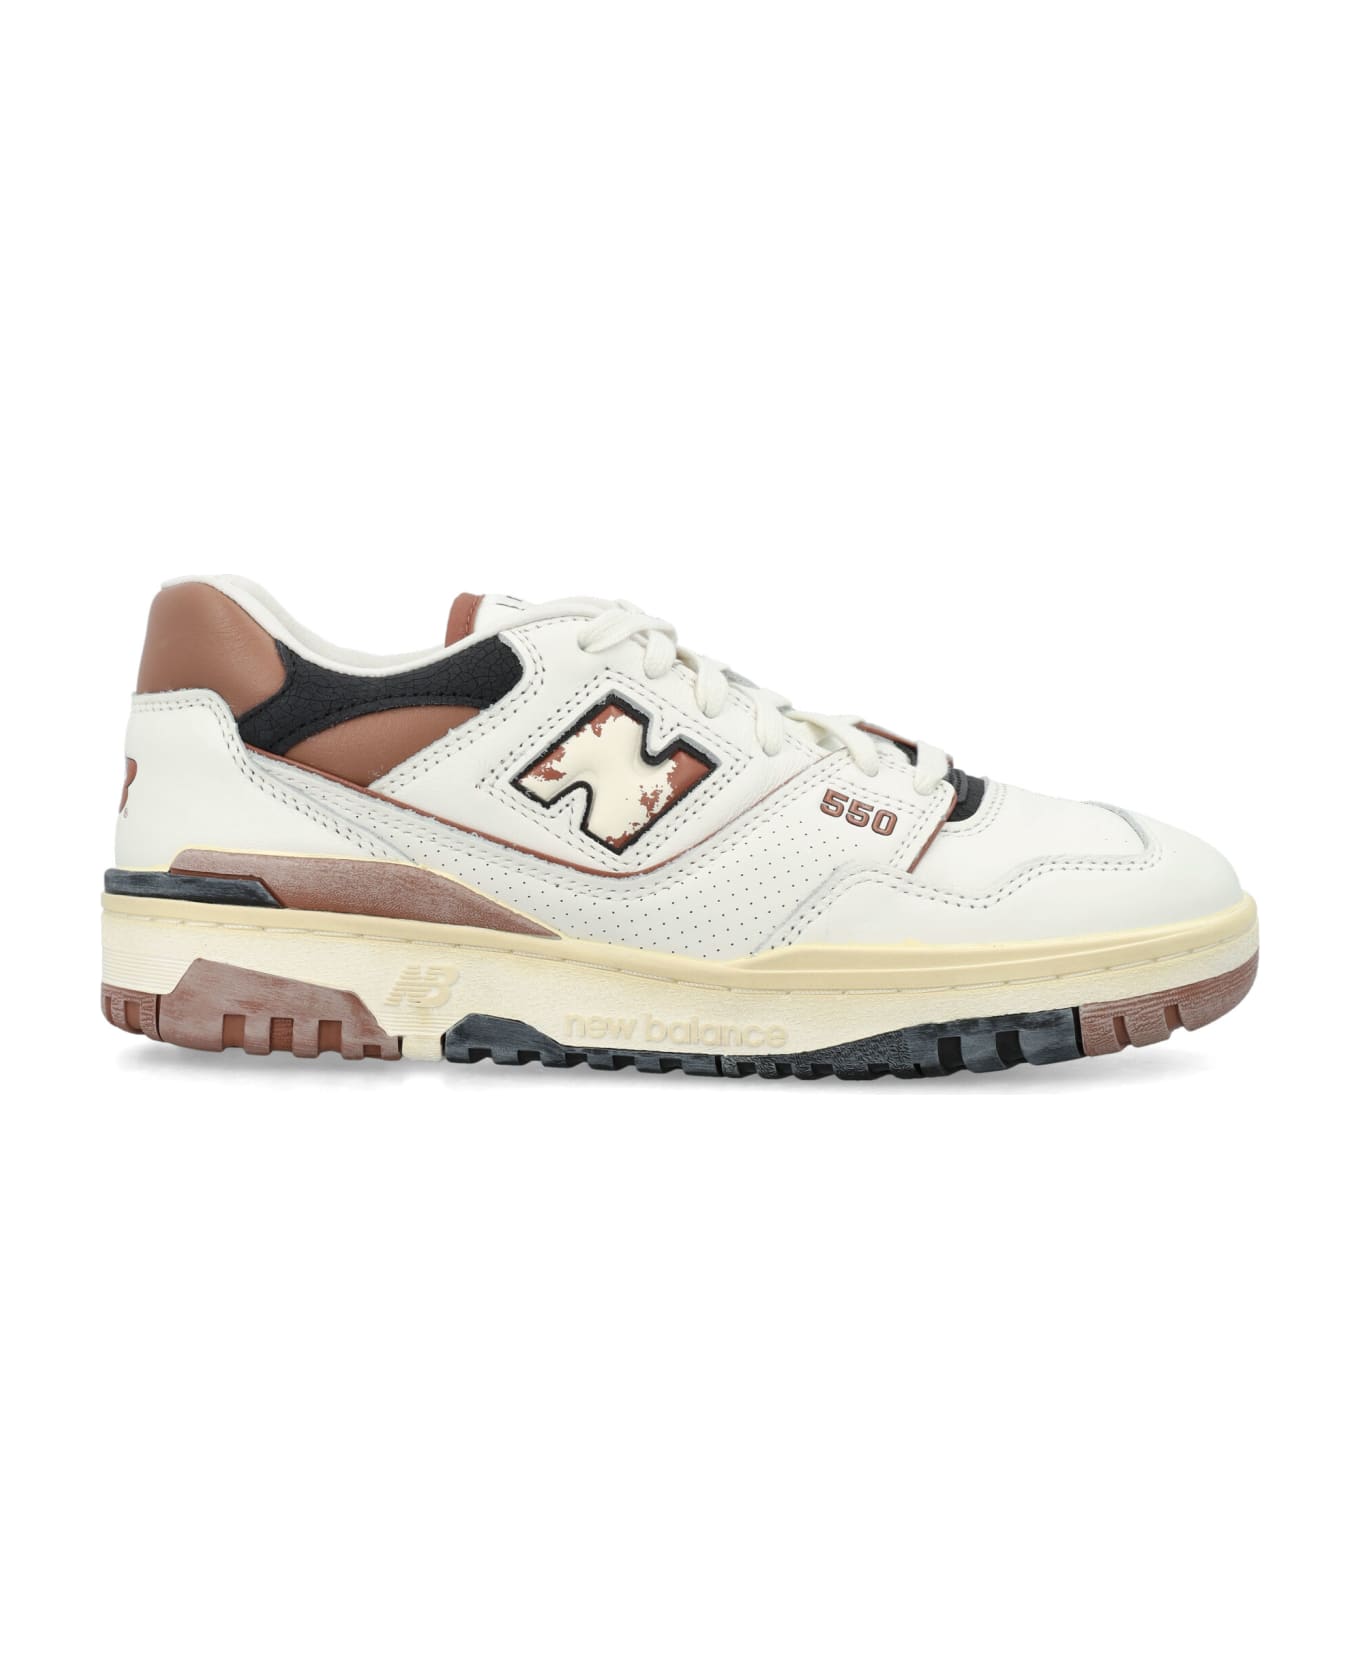 New Balance 550 Sneakers - WHITE BEIGE